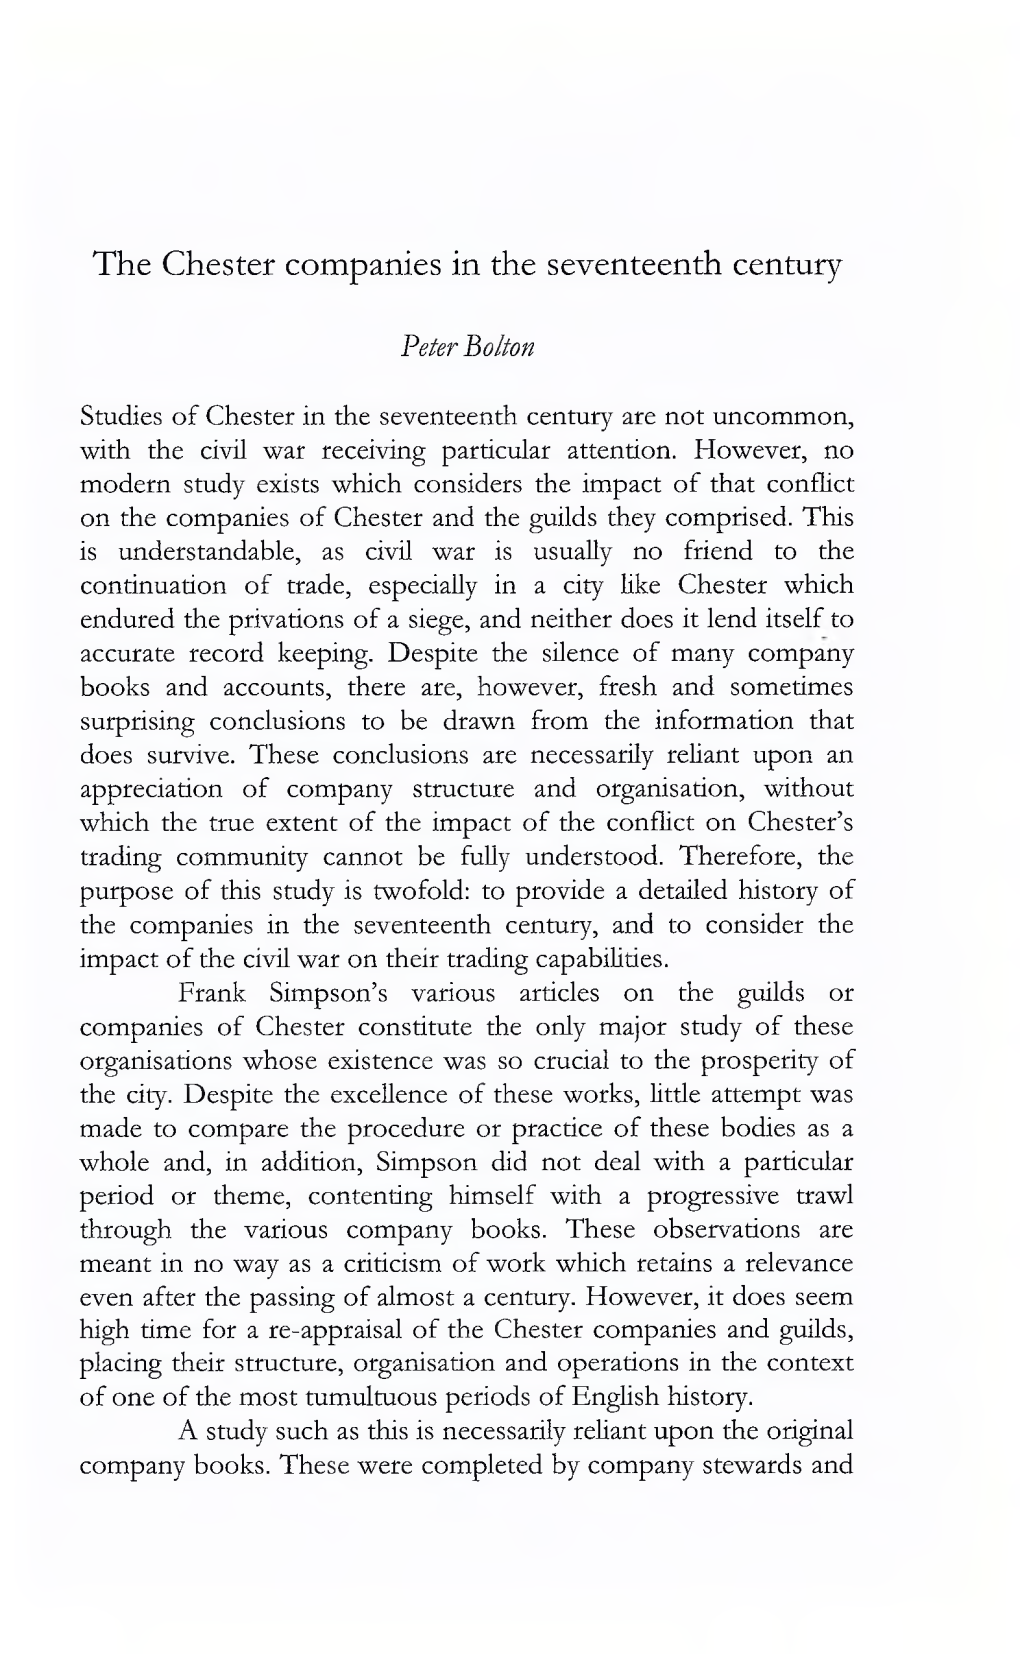 The Chester Companies in the Seventeenth Century